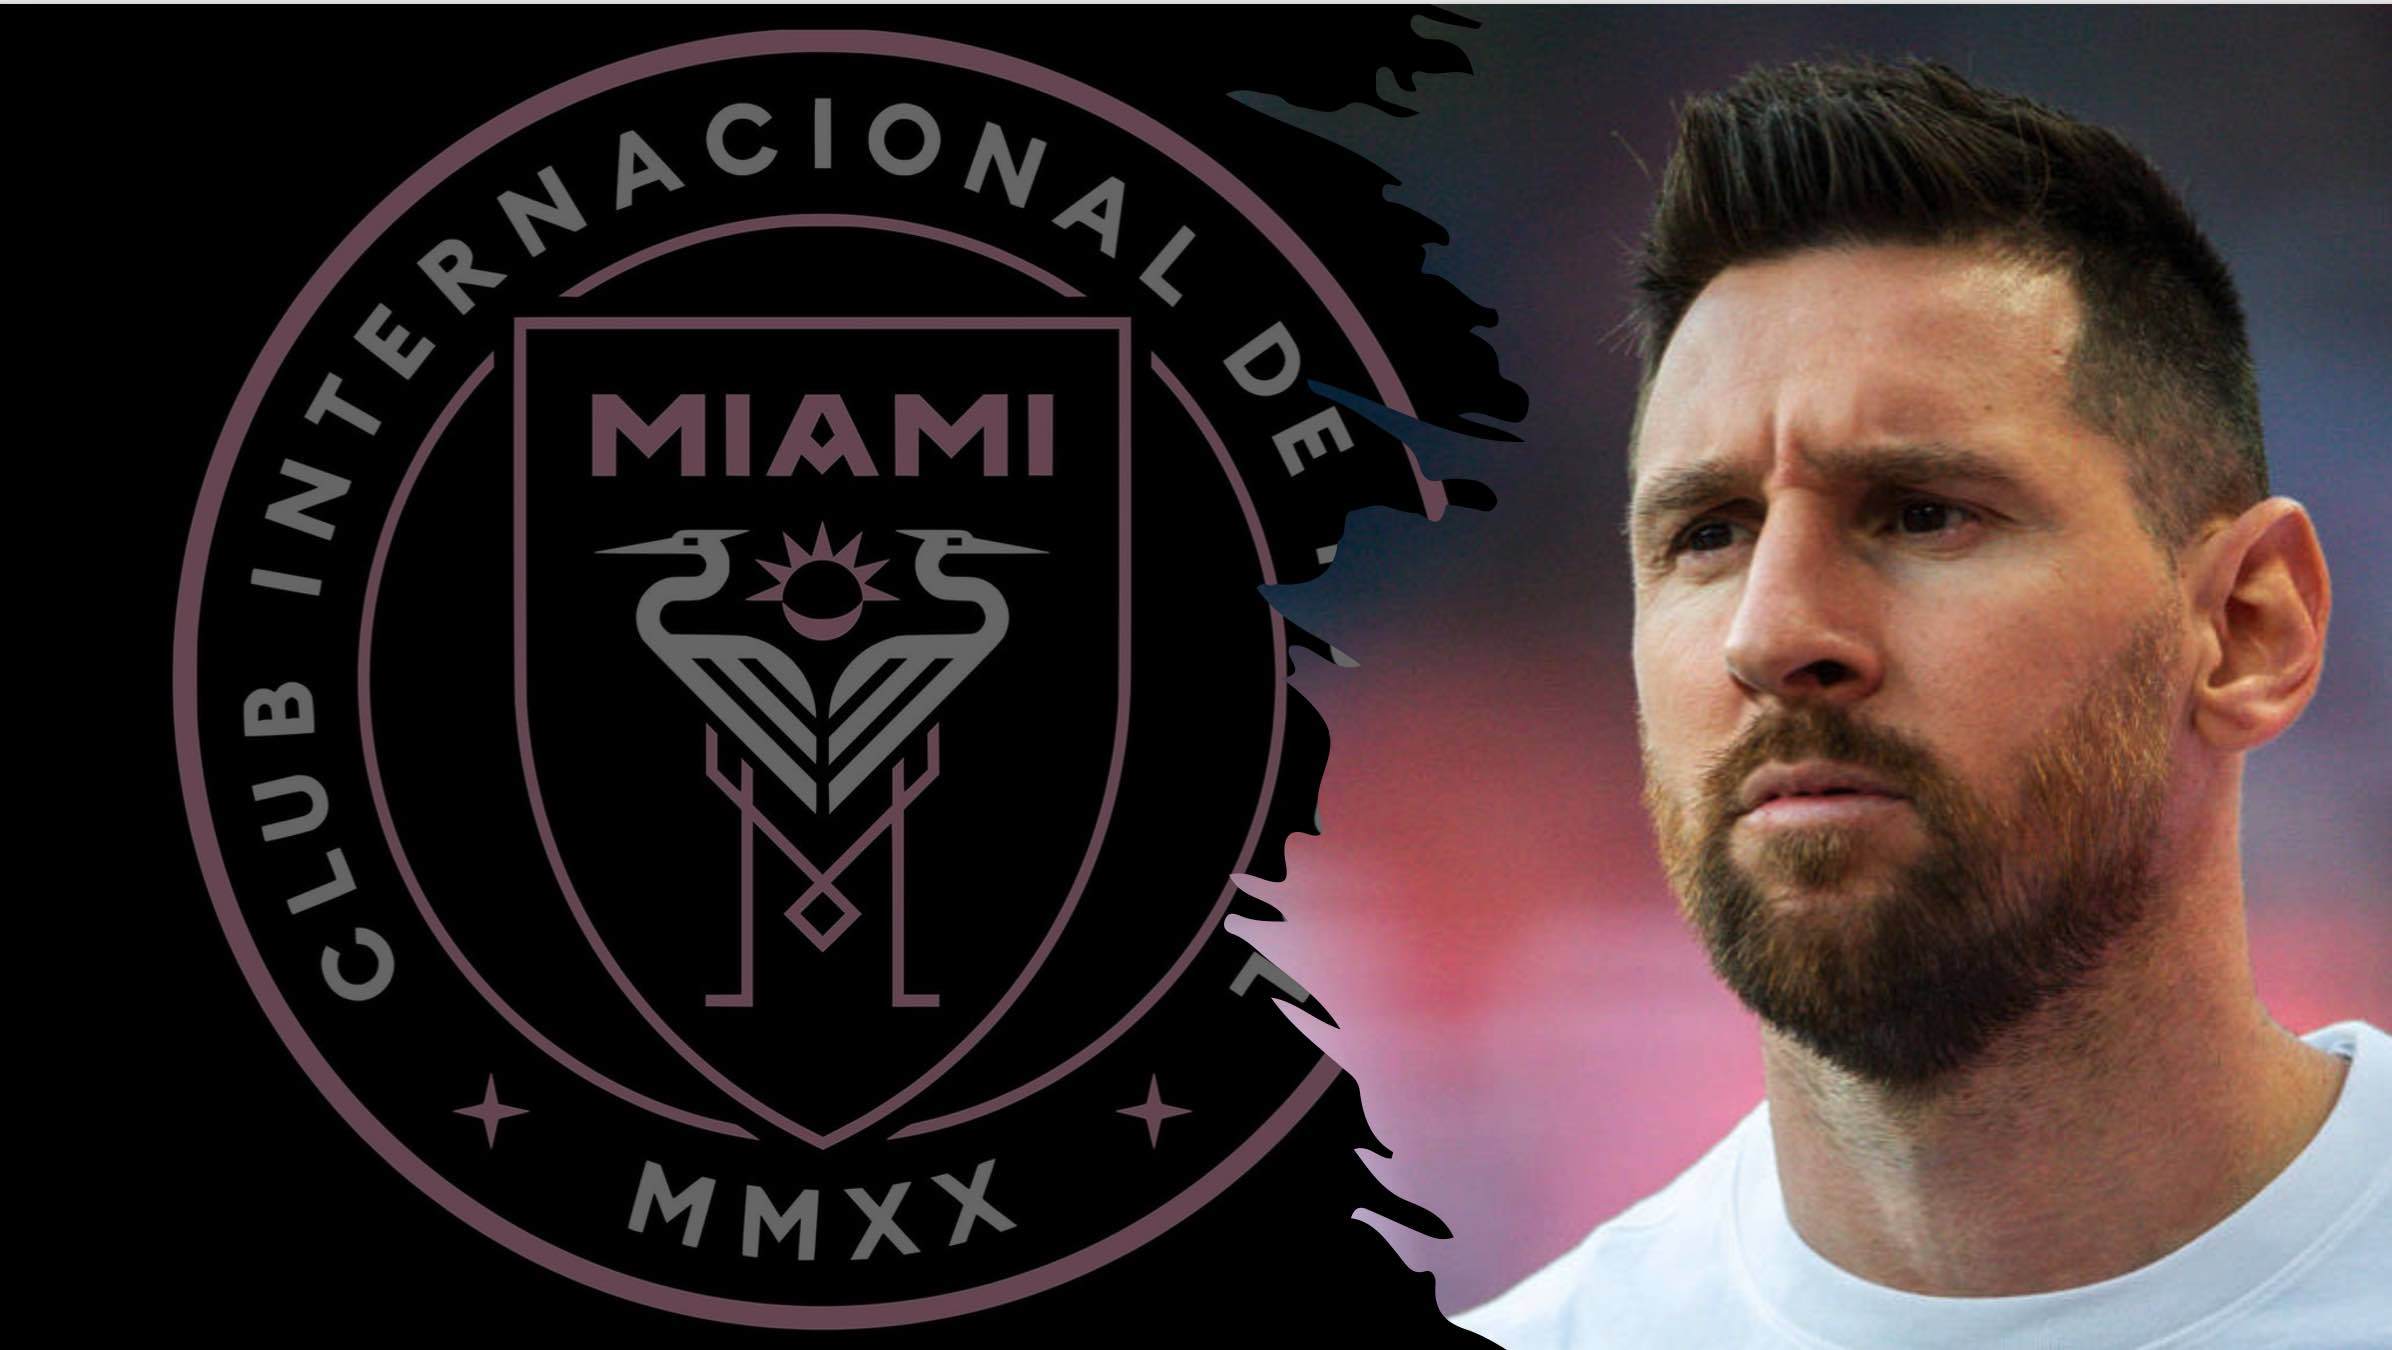 Lionel Messi announces he's joining MLS side Inter Miami on free